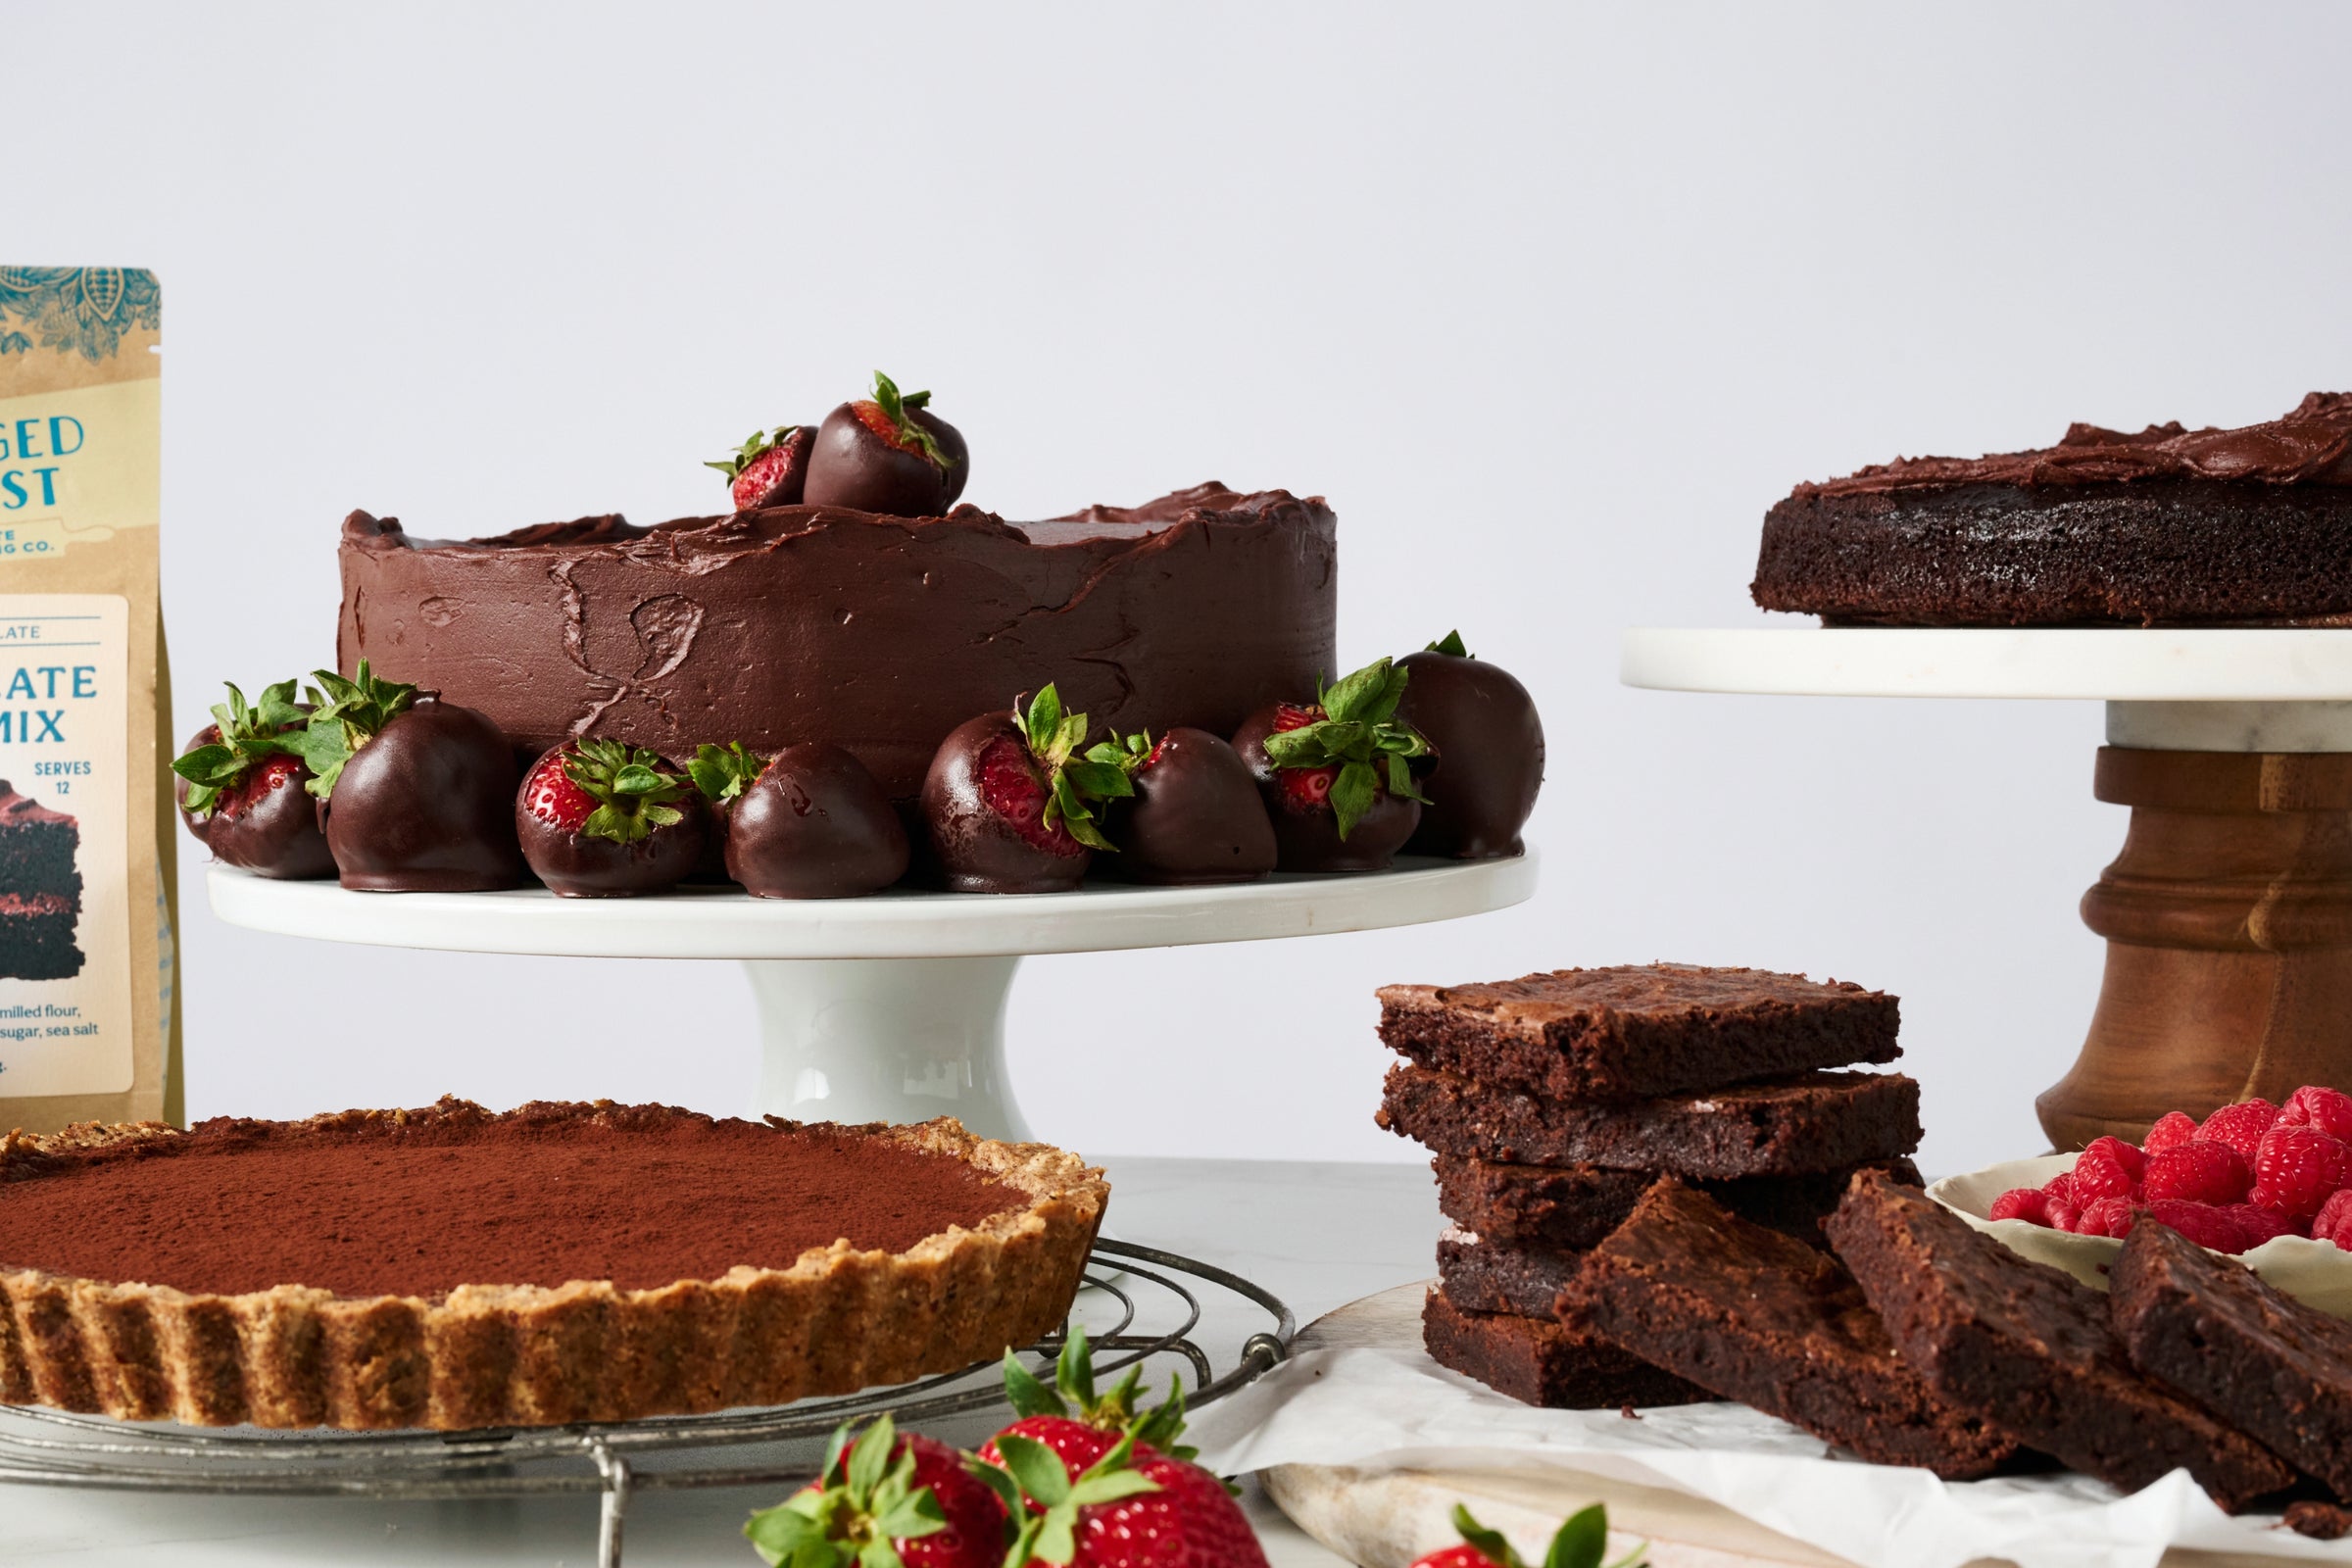 A selection of chocolate desserts, including a cake topped with strawberries, on display.